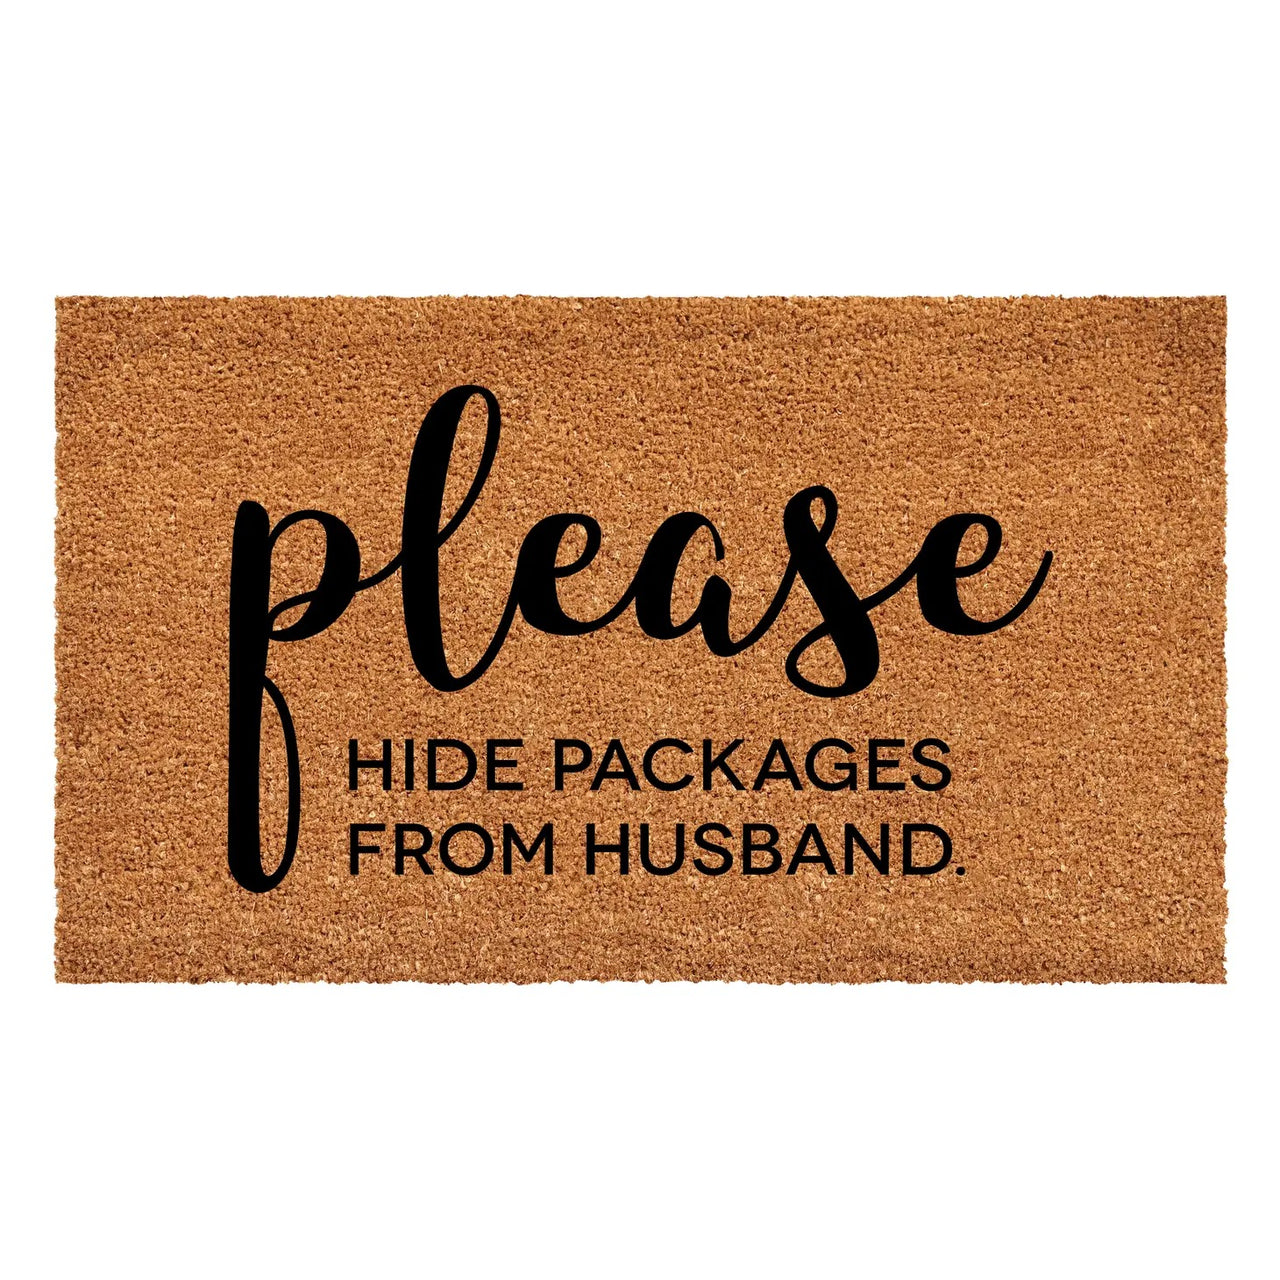 Hide Packages From Husband Doormat